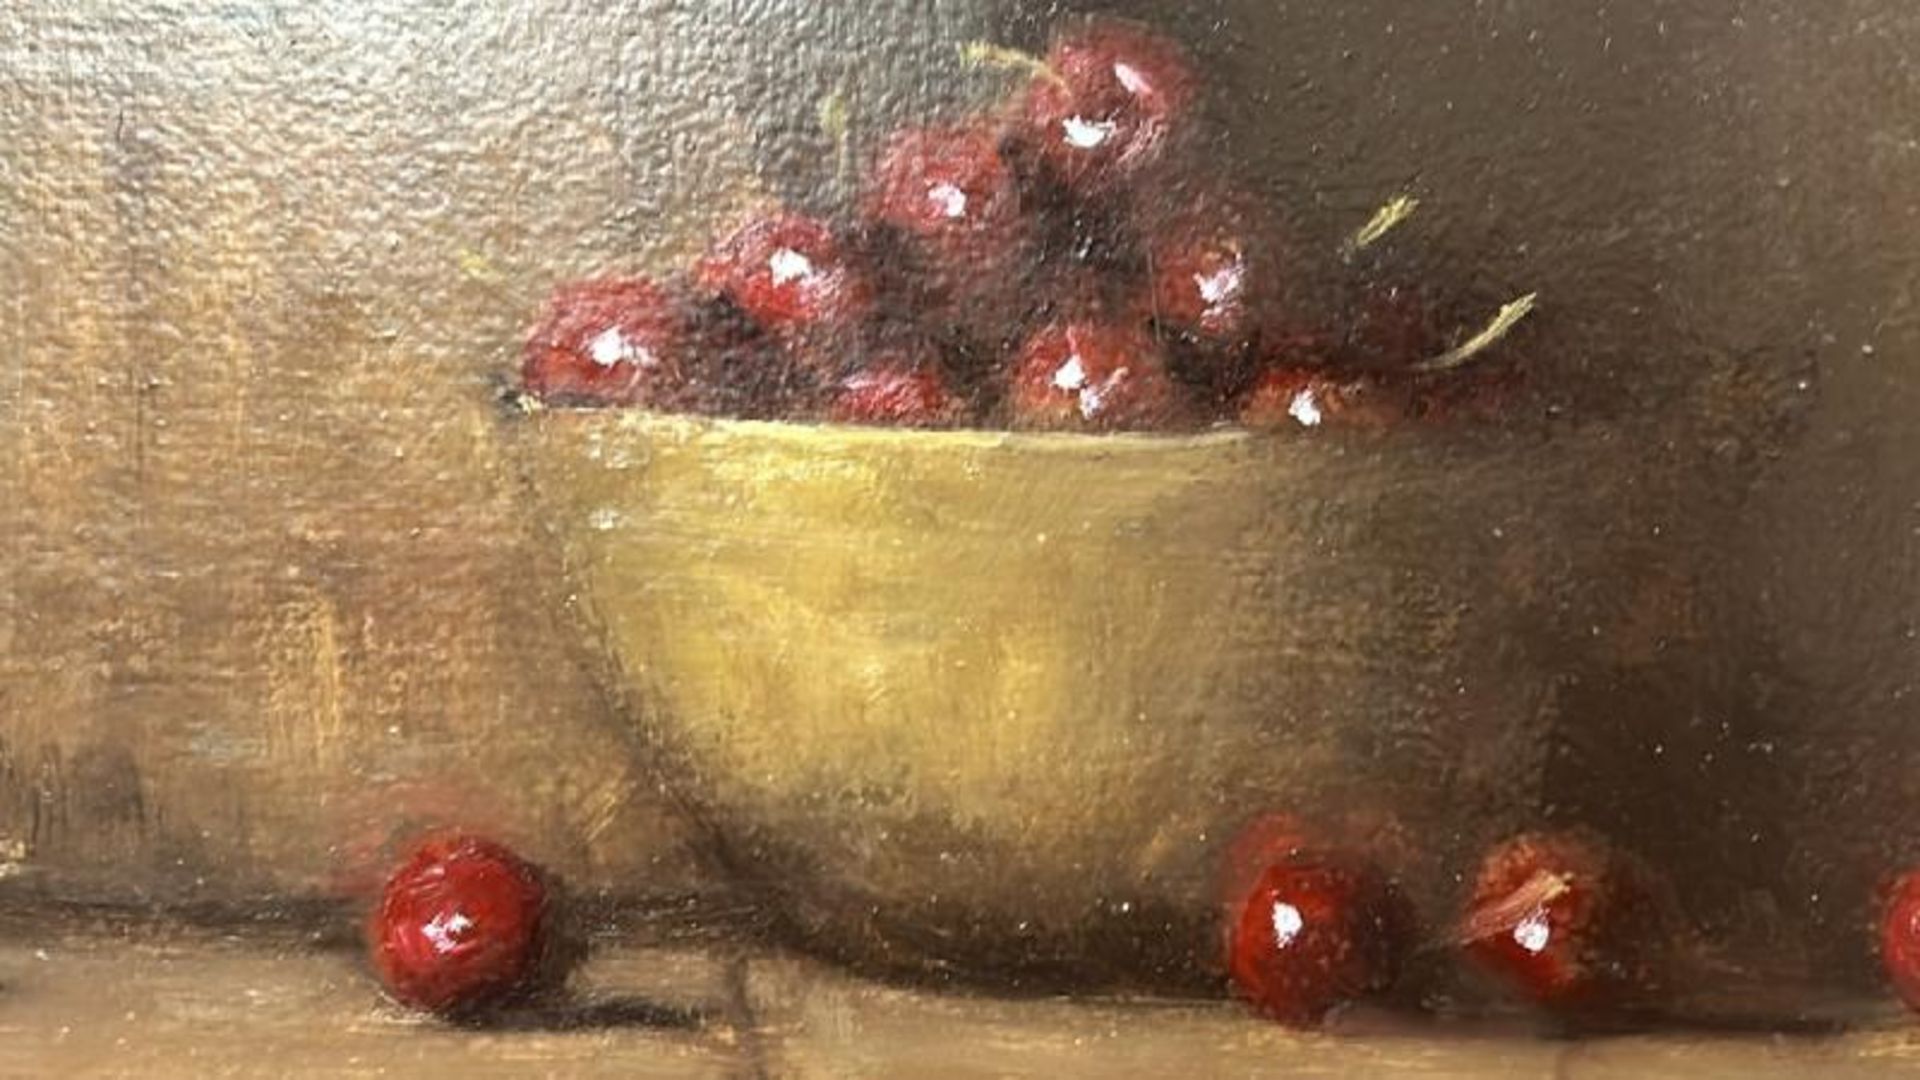 Still life oil on canvas, "Blue & White Jar with Cherry's" indistictly signed in red, top right - Image 3 of 5